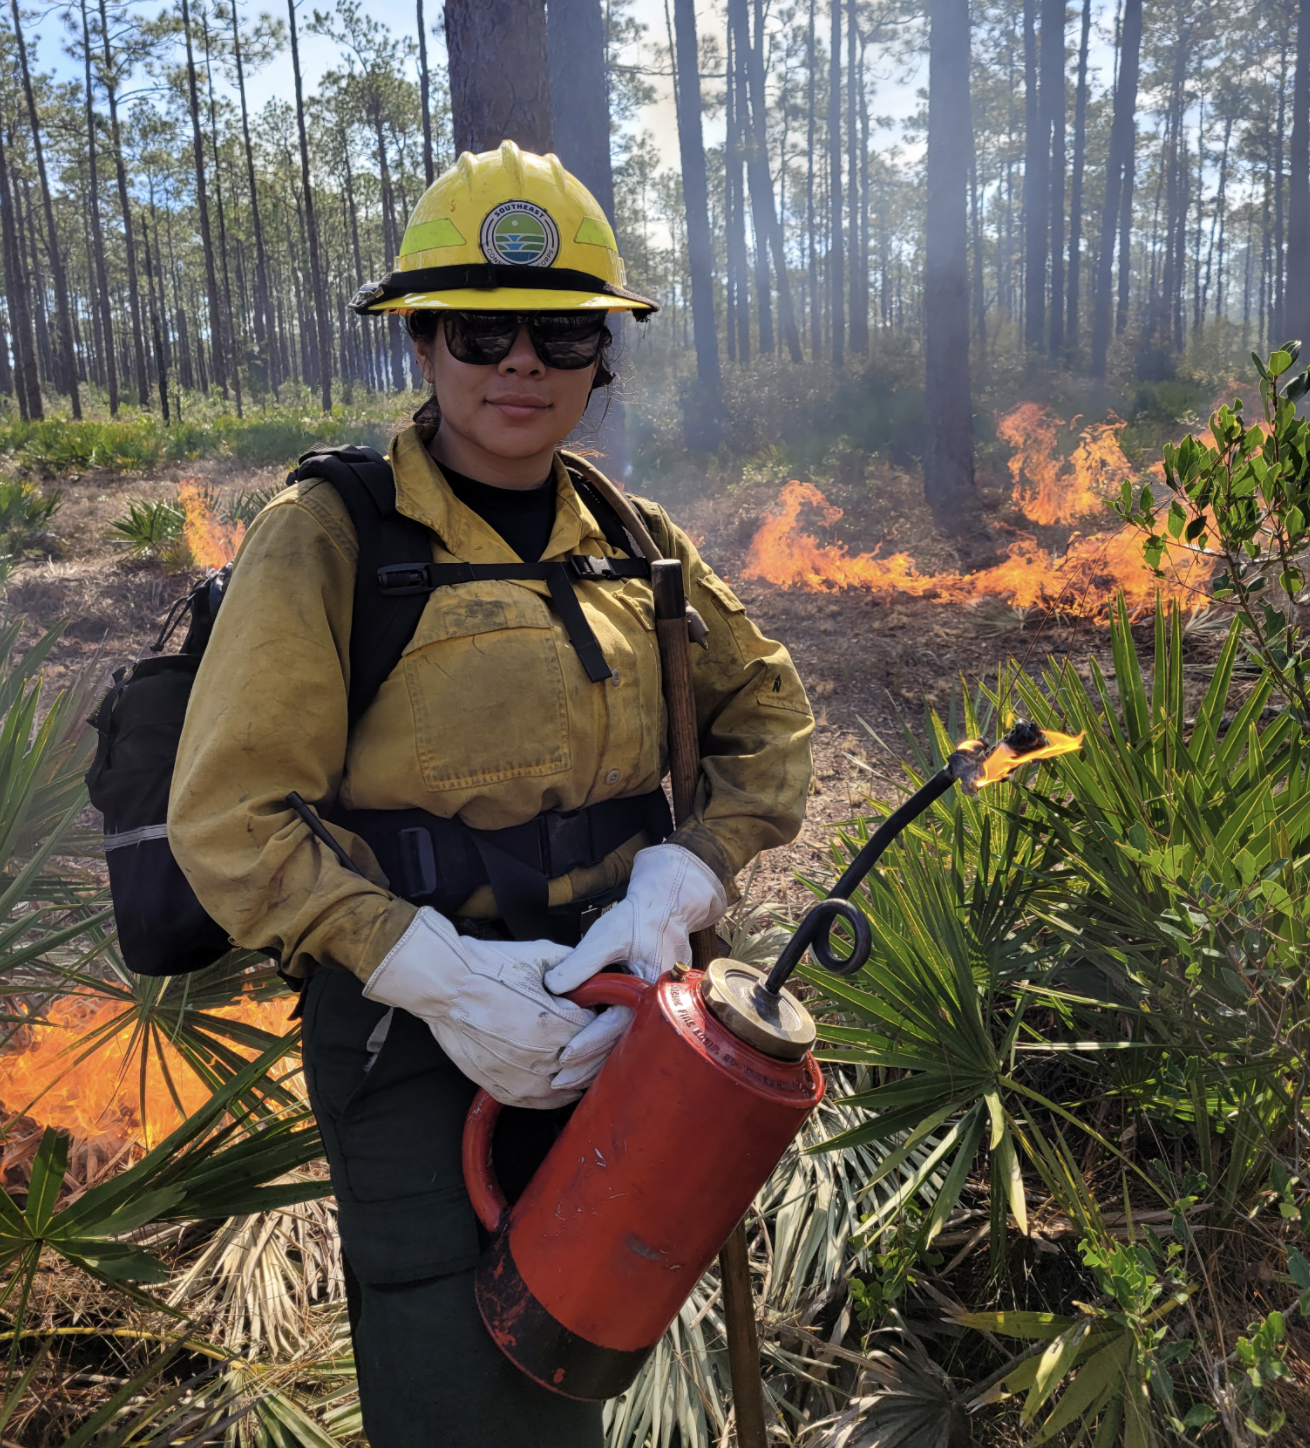 VFC Crew member poses with blowtorch with fire in the background